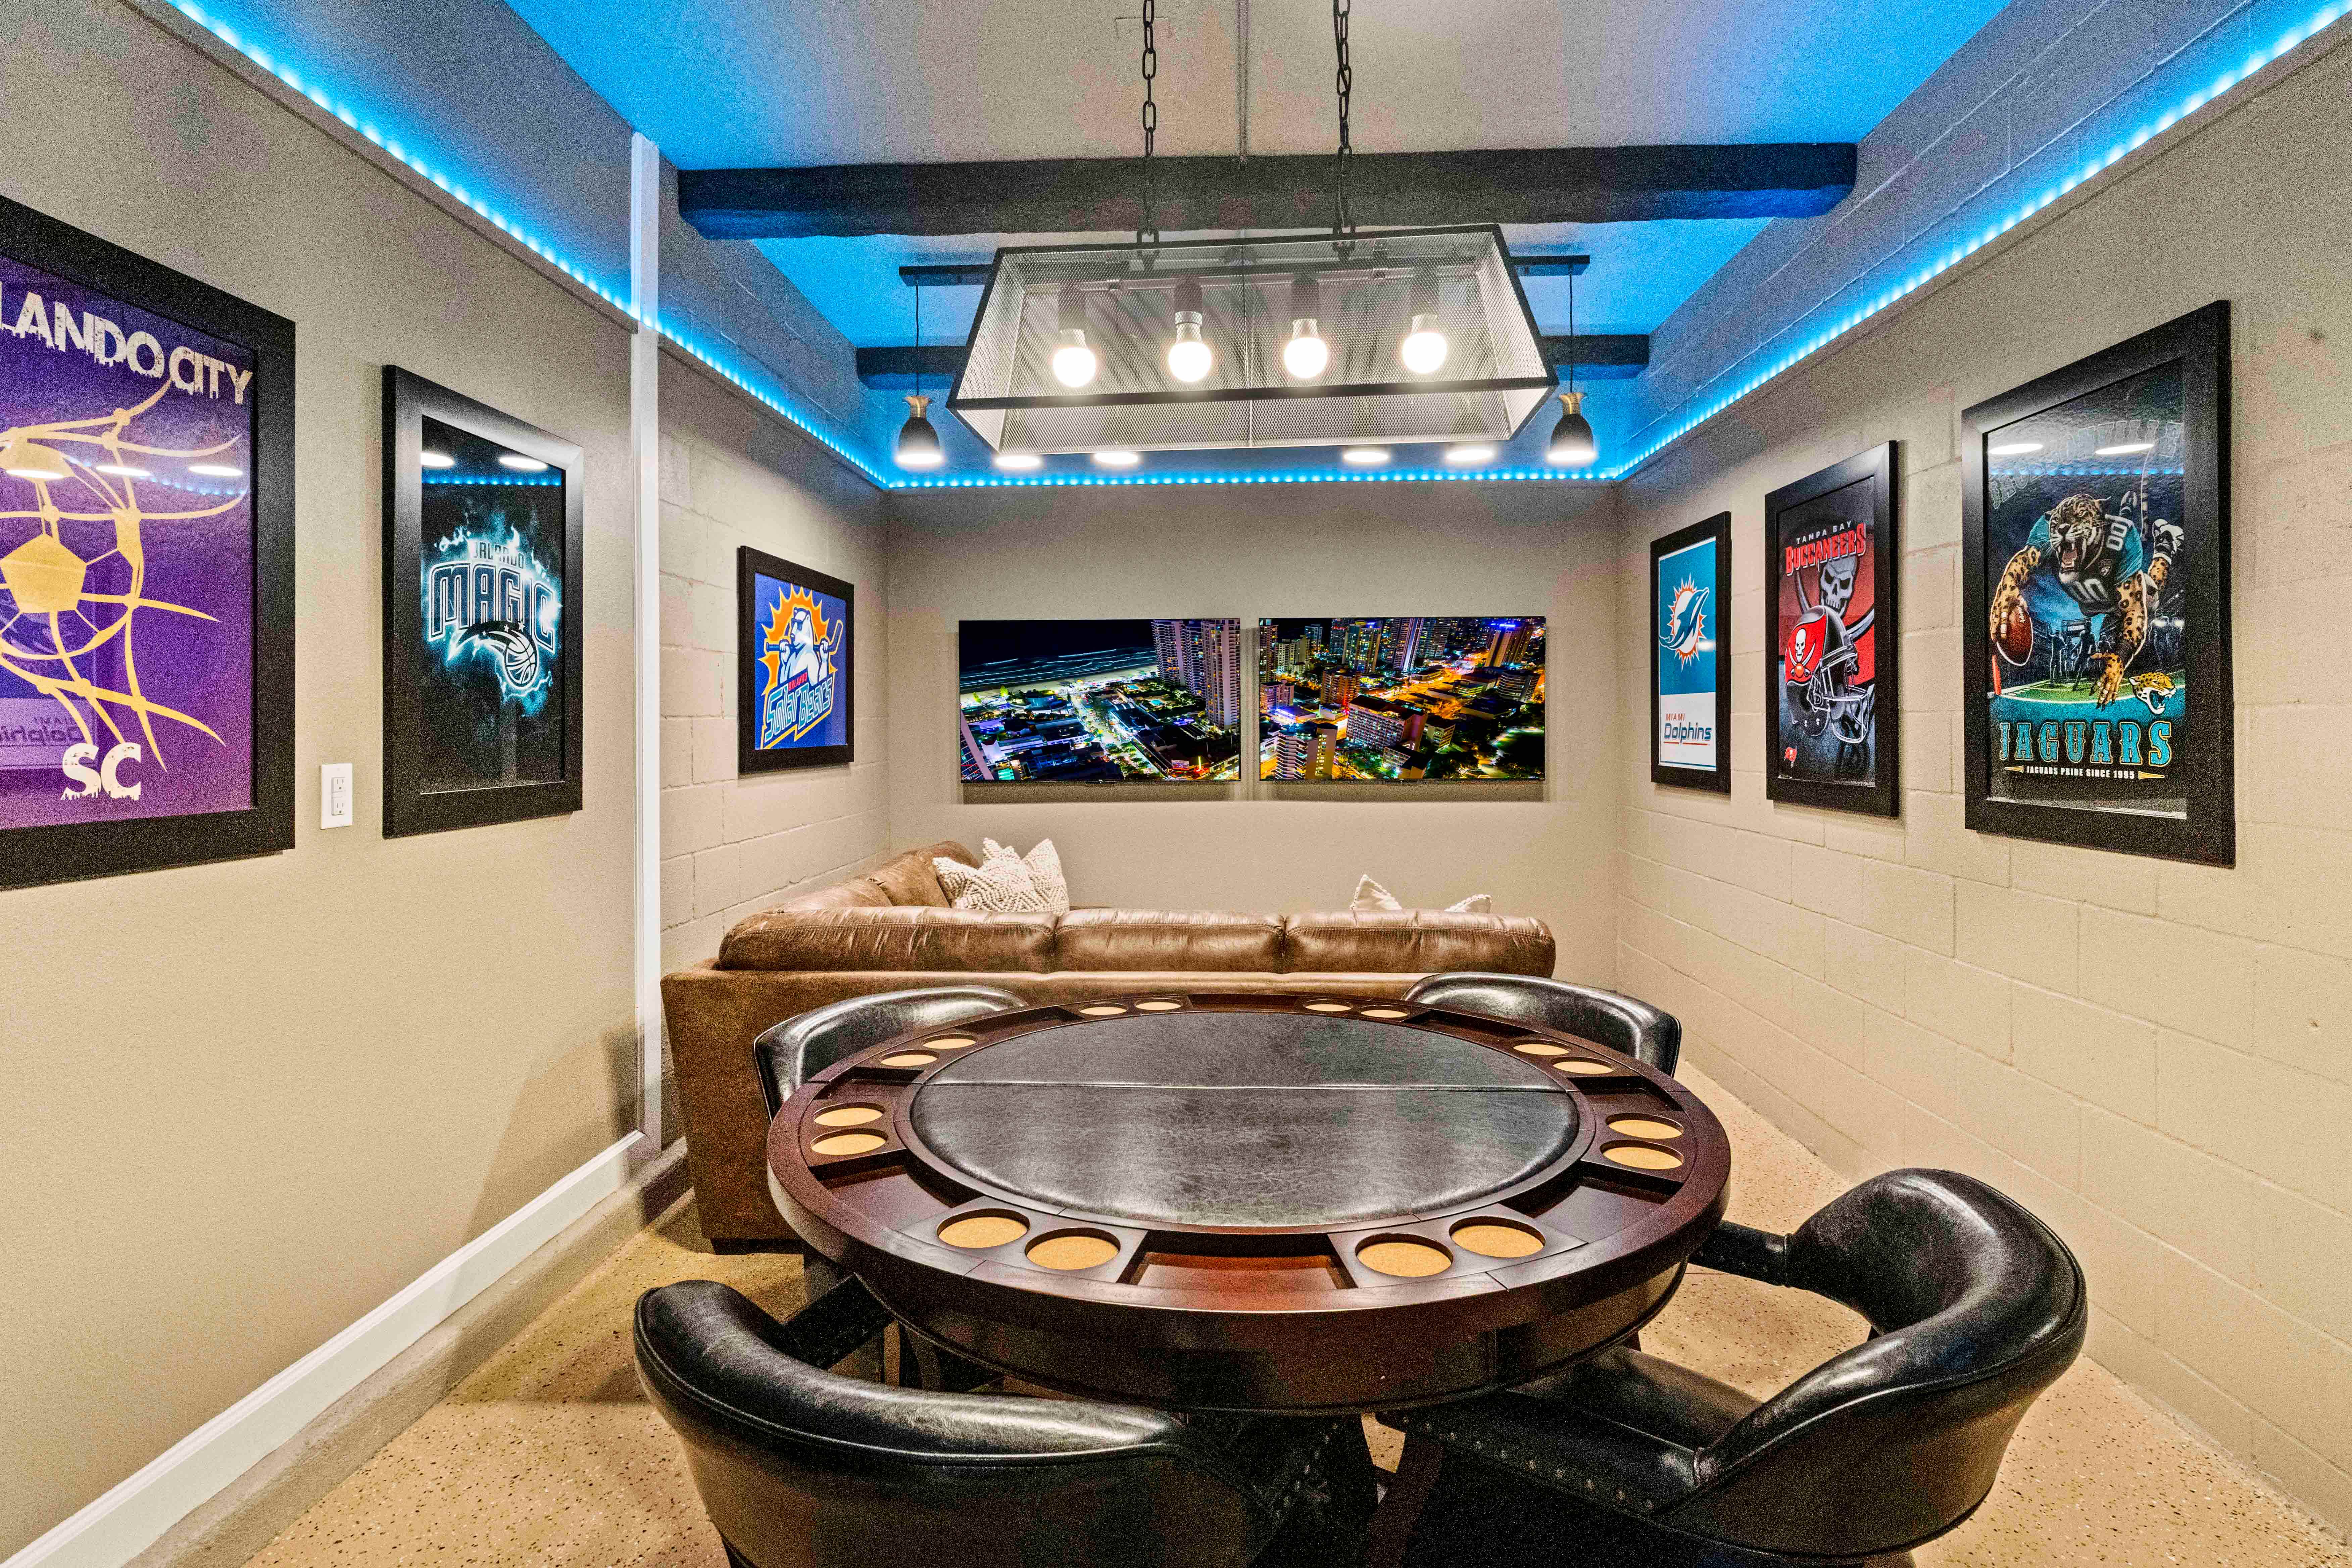 Man cave sanctuary of the Townhouse in Davenport Florida - Go down and discover this man cave for more fun - Bond with more of your friends - A man cave for additional entertainment